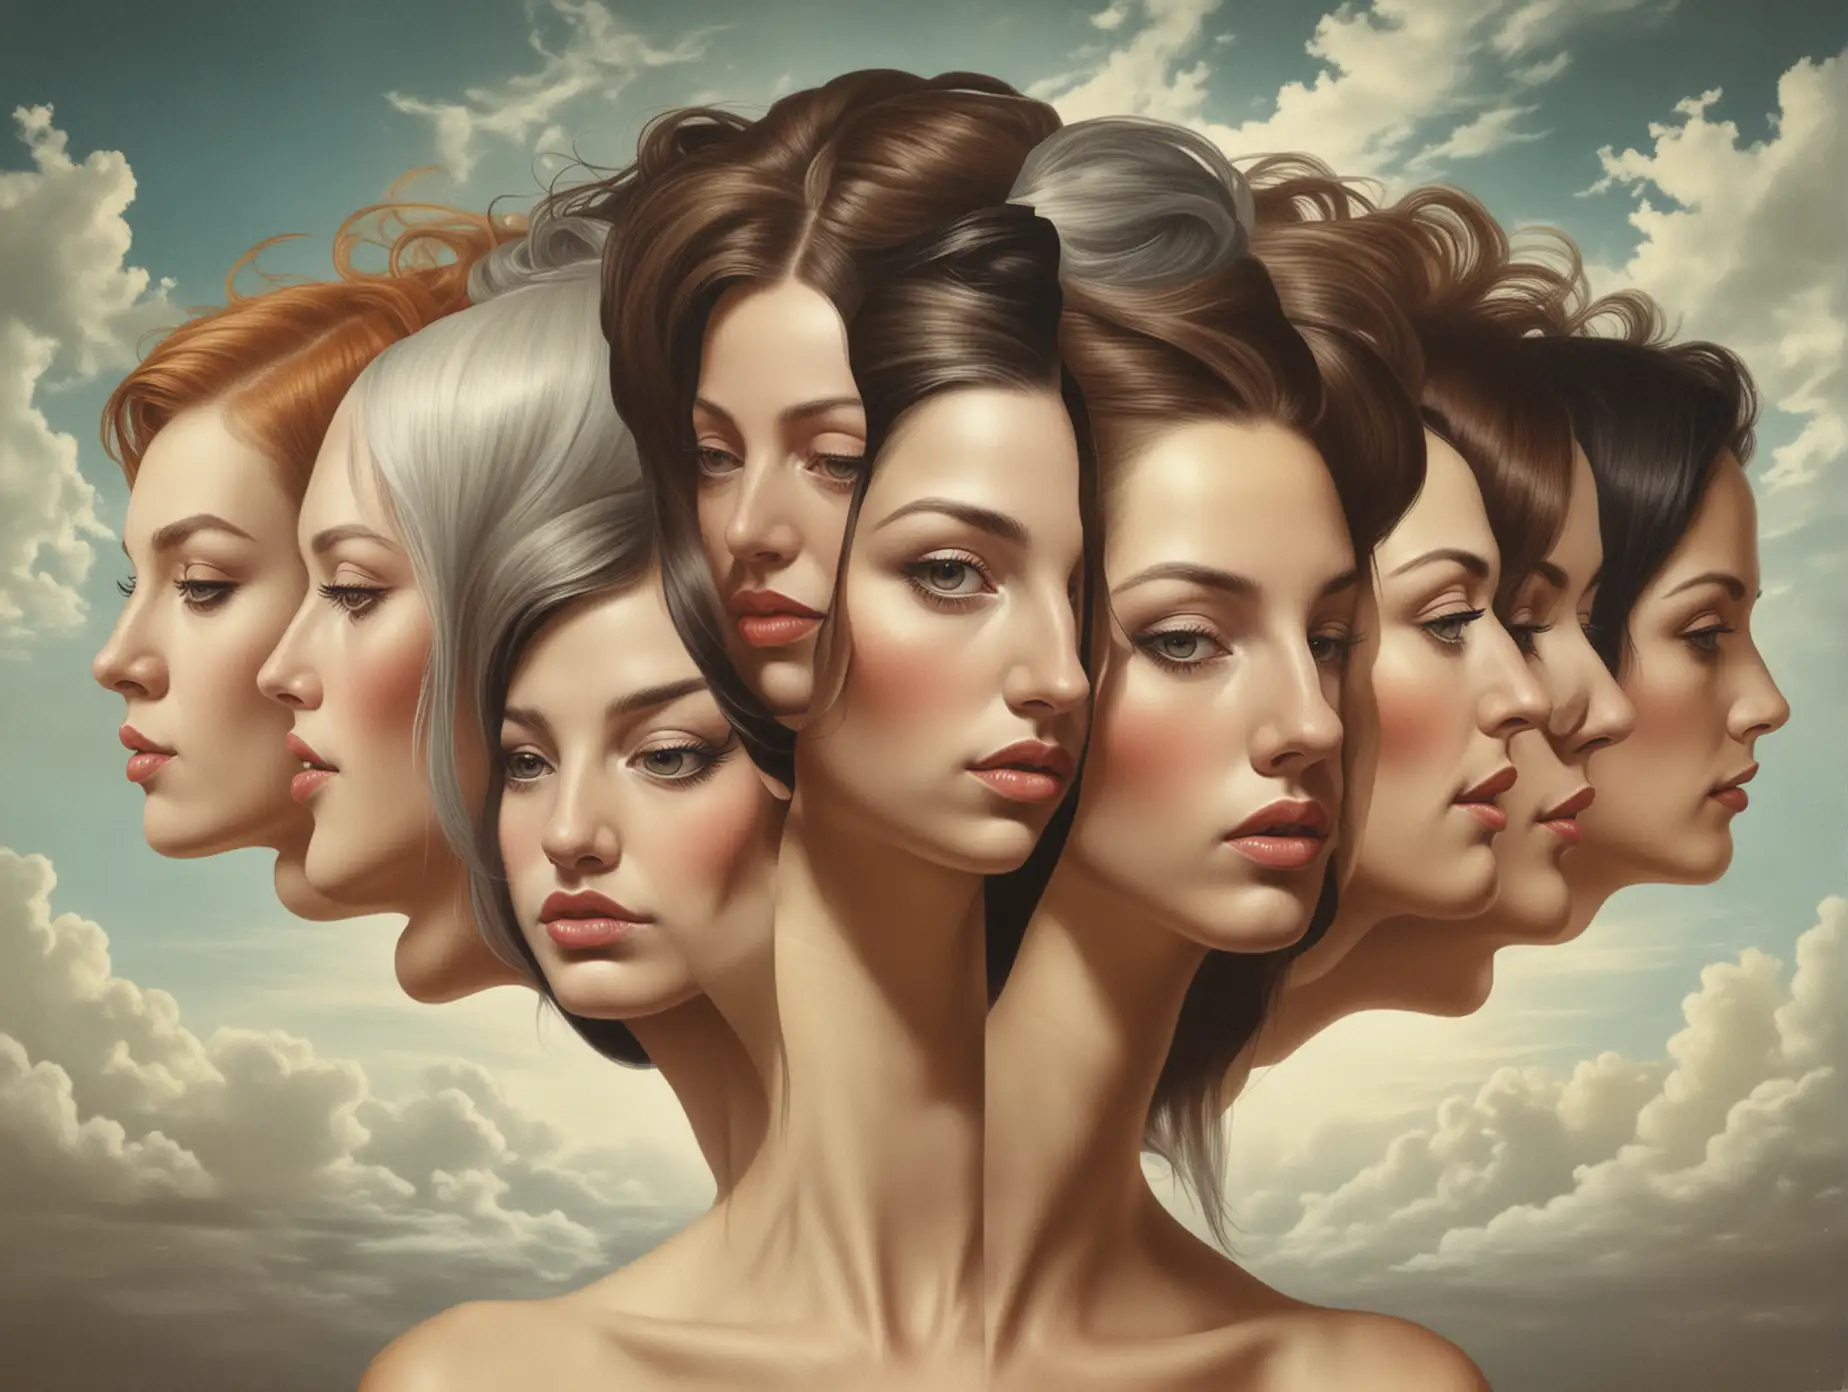 Surreal Image of Multiple Women Emanating from a Single Female Figure